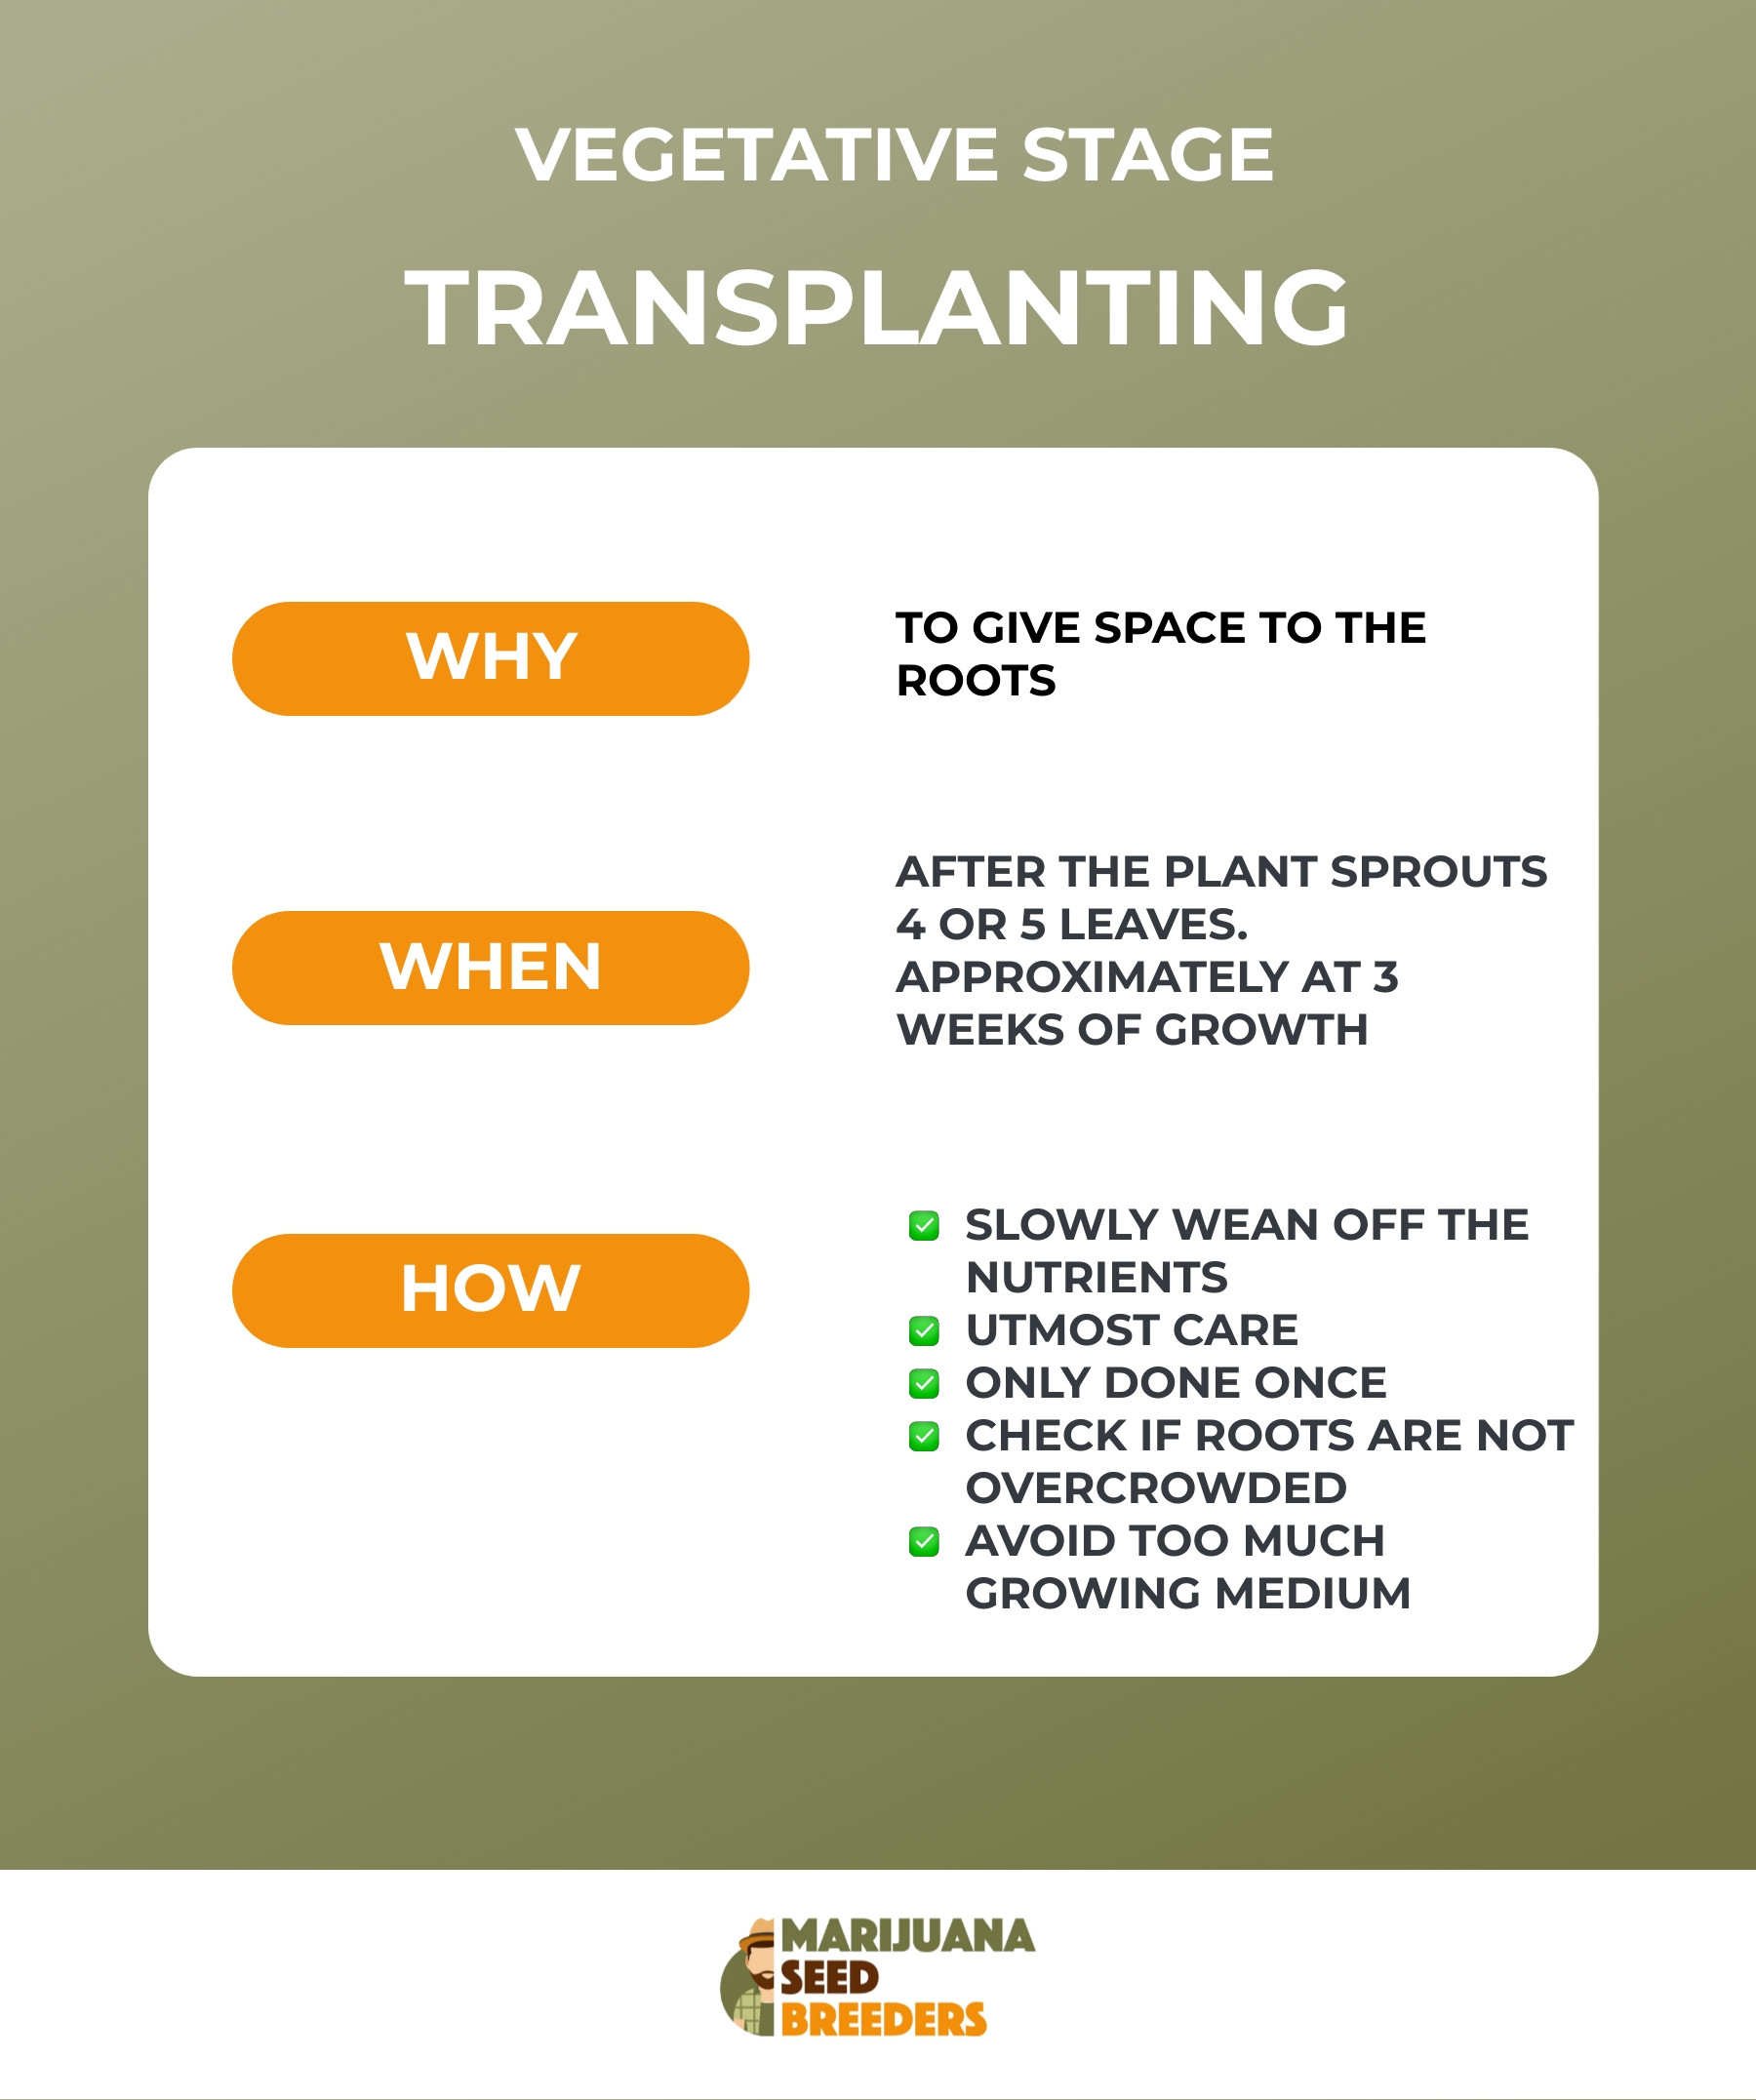 overview with tips about transplanting in the vegetative stage of marijuana growth